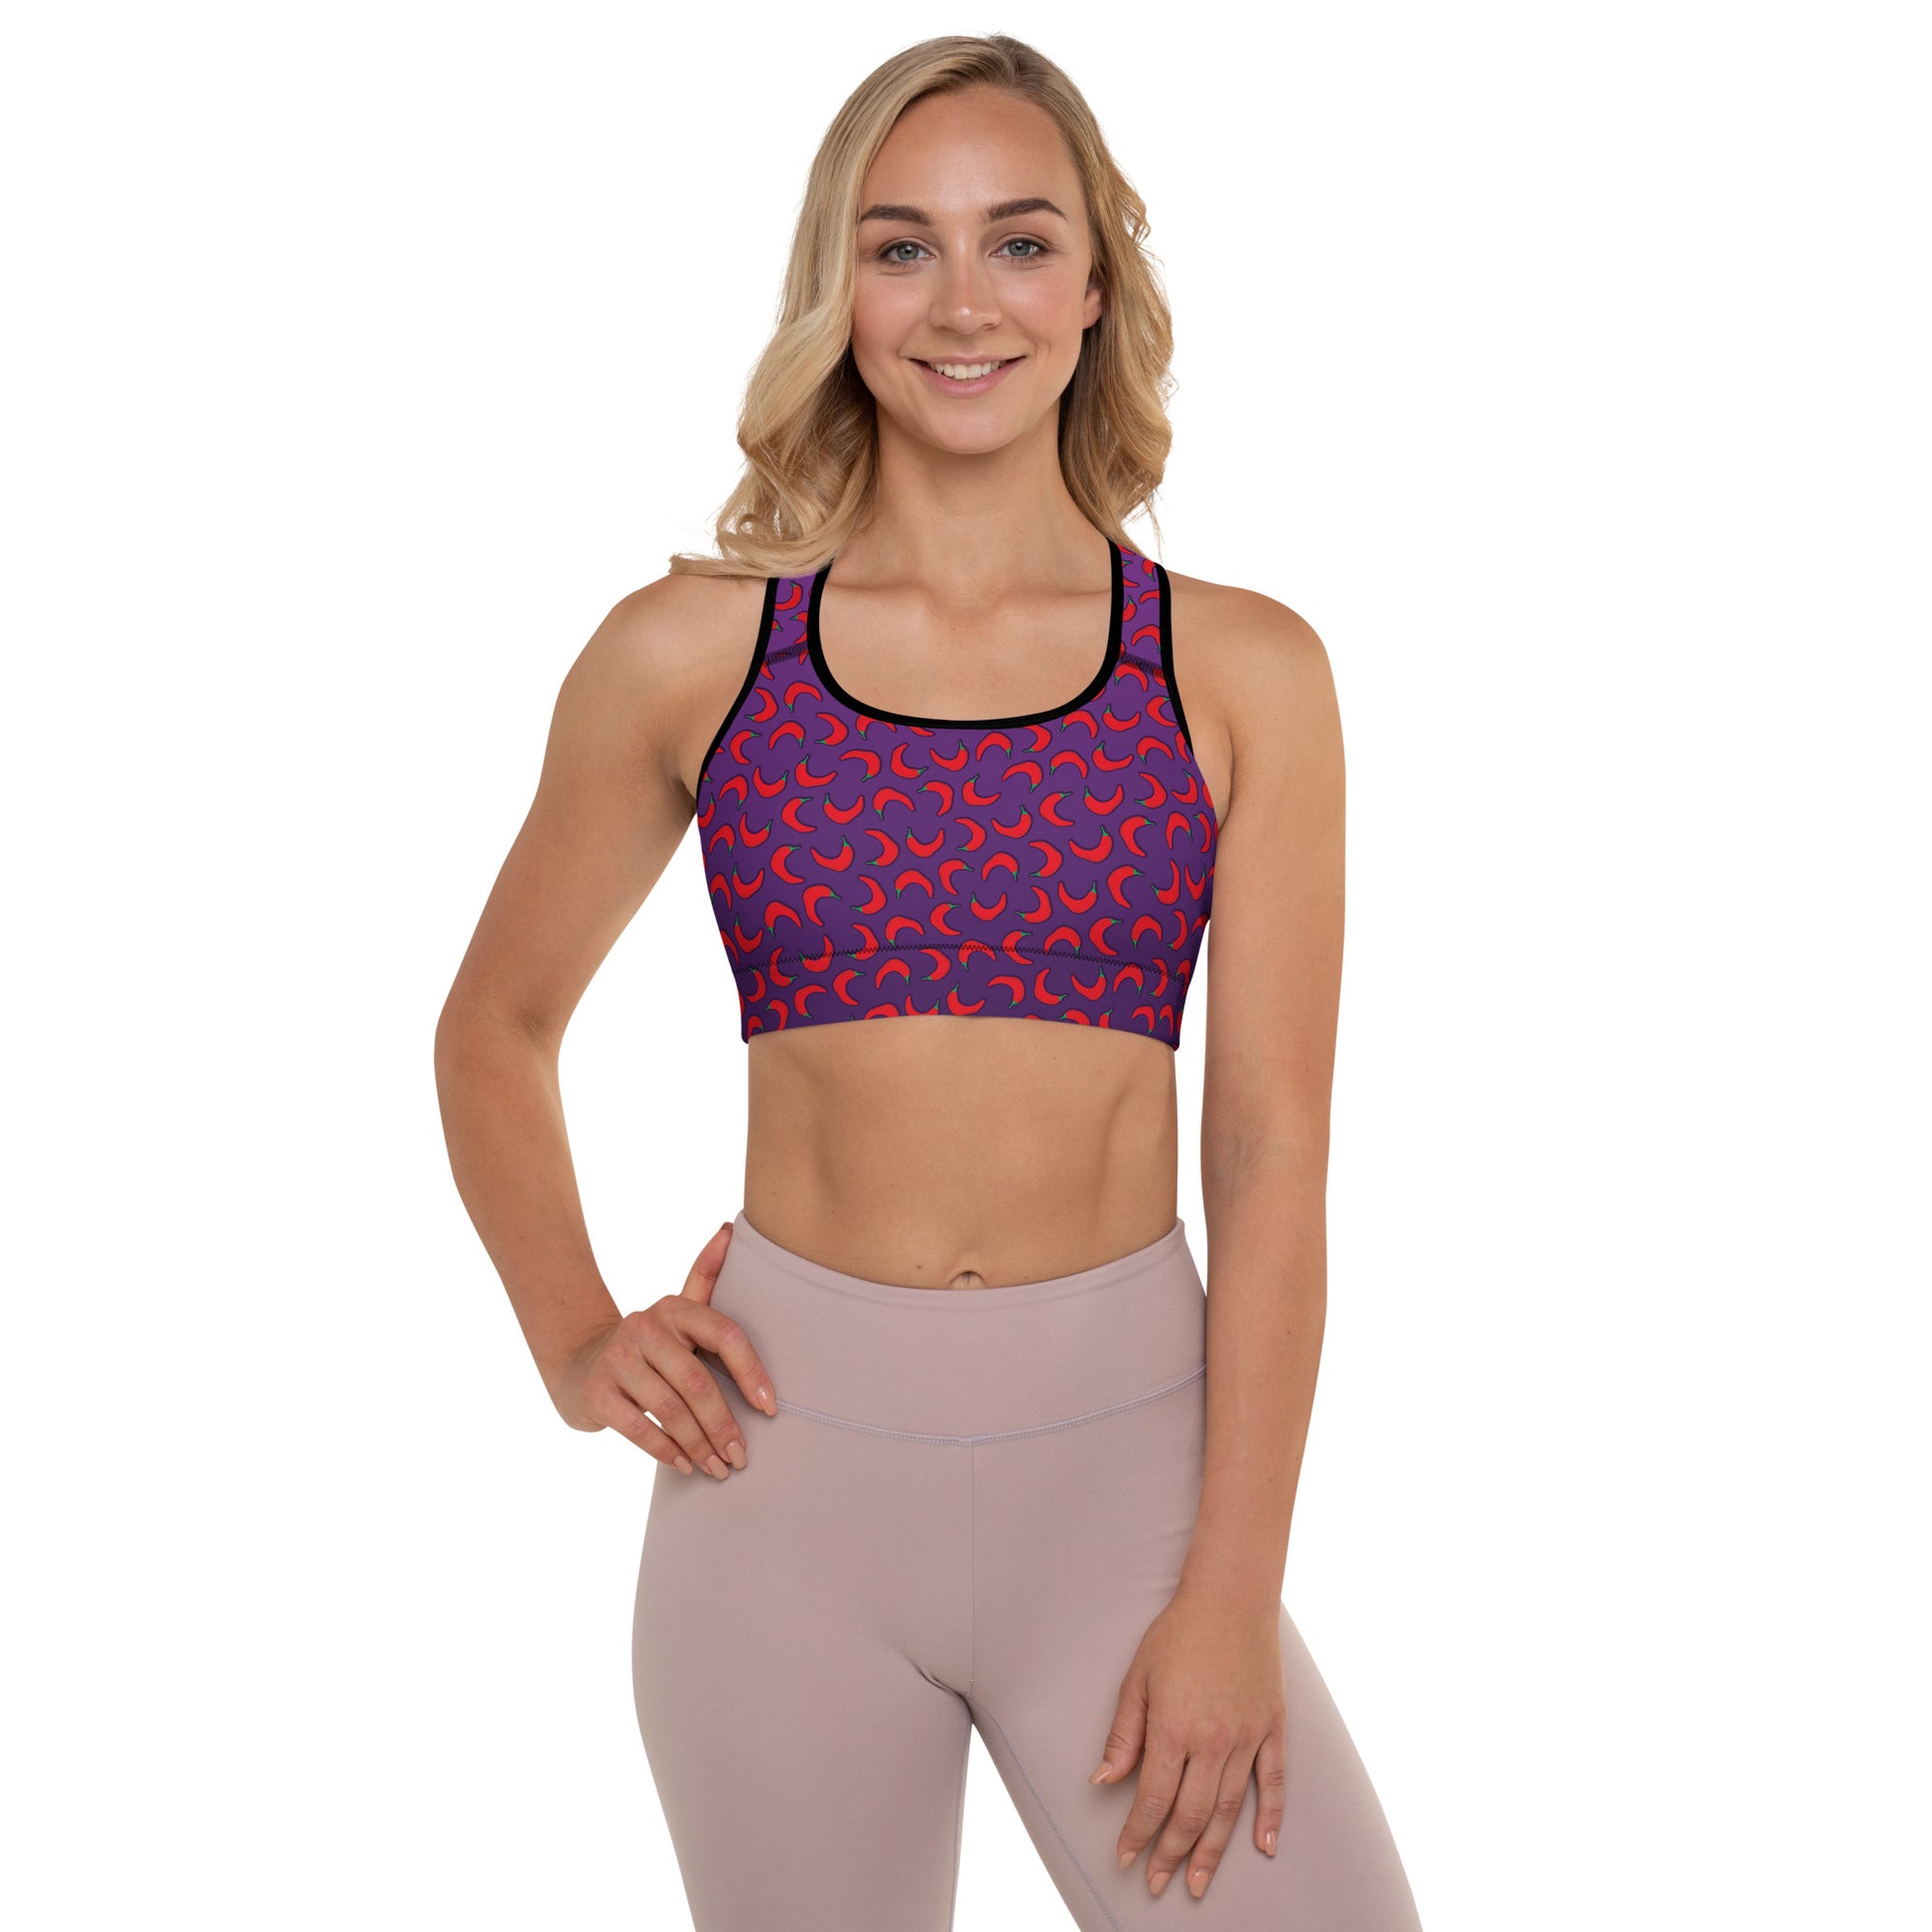 Weirdo | Extremely hot padded sports bra for you weirdos who like it hot! This sports bra has hot peppers printed all over the bra and has our Extremely Hot Weirdo funny meme printed at the back.